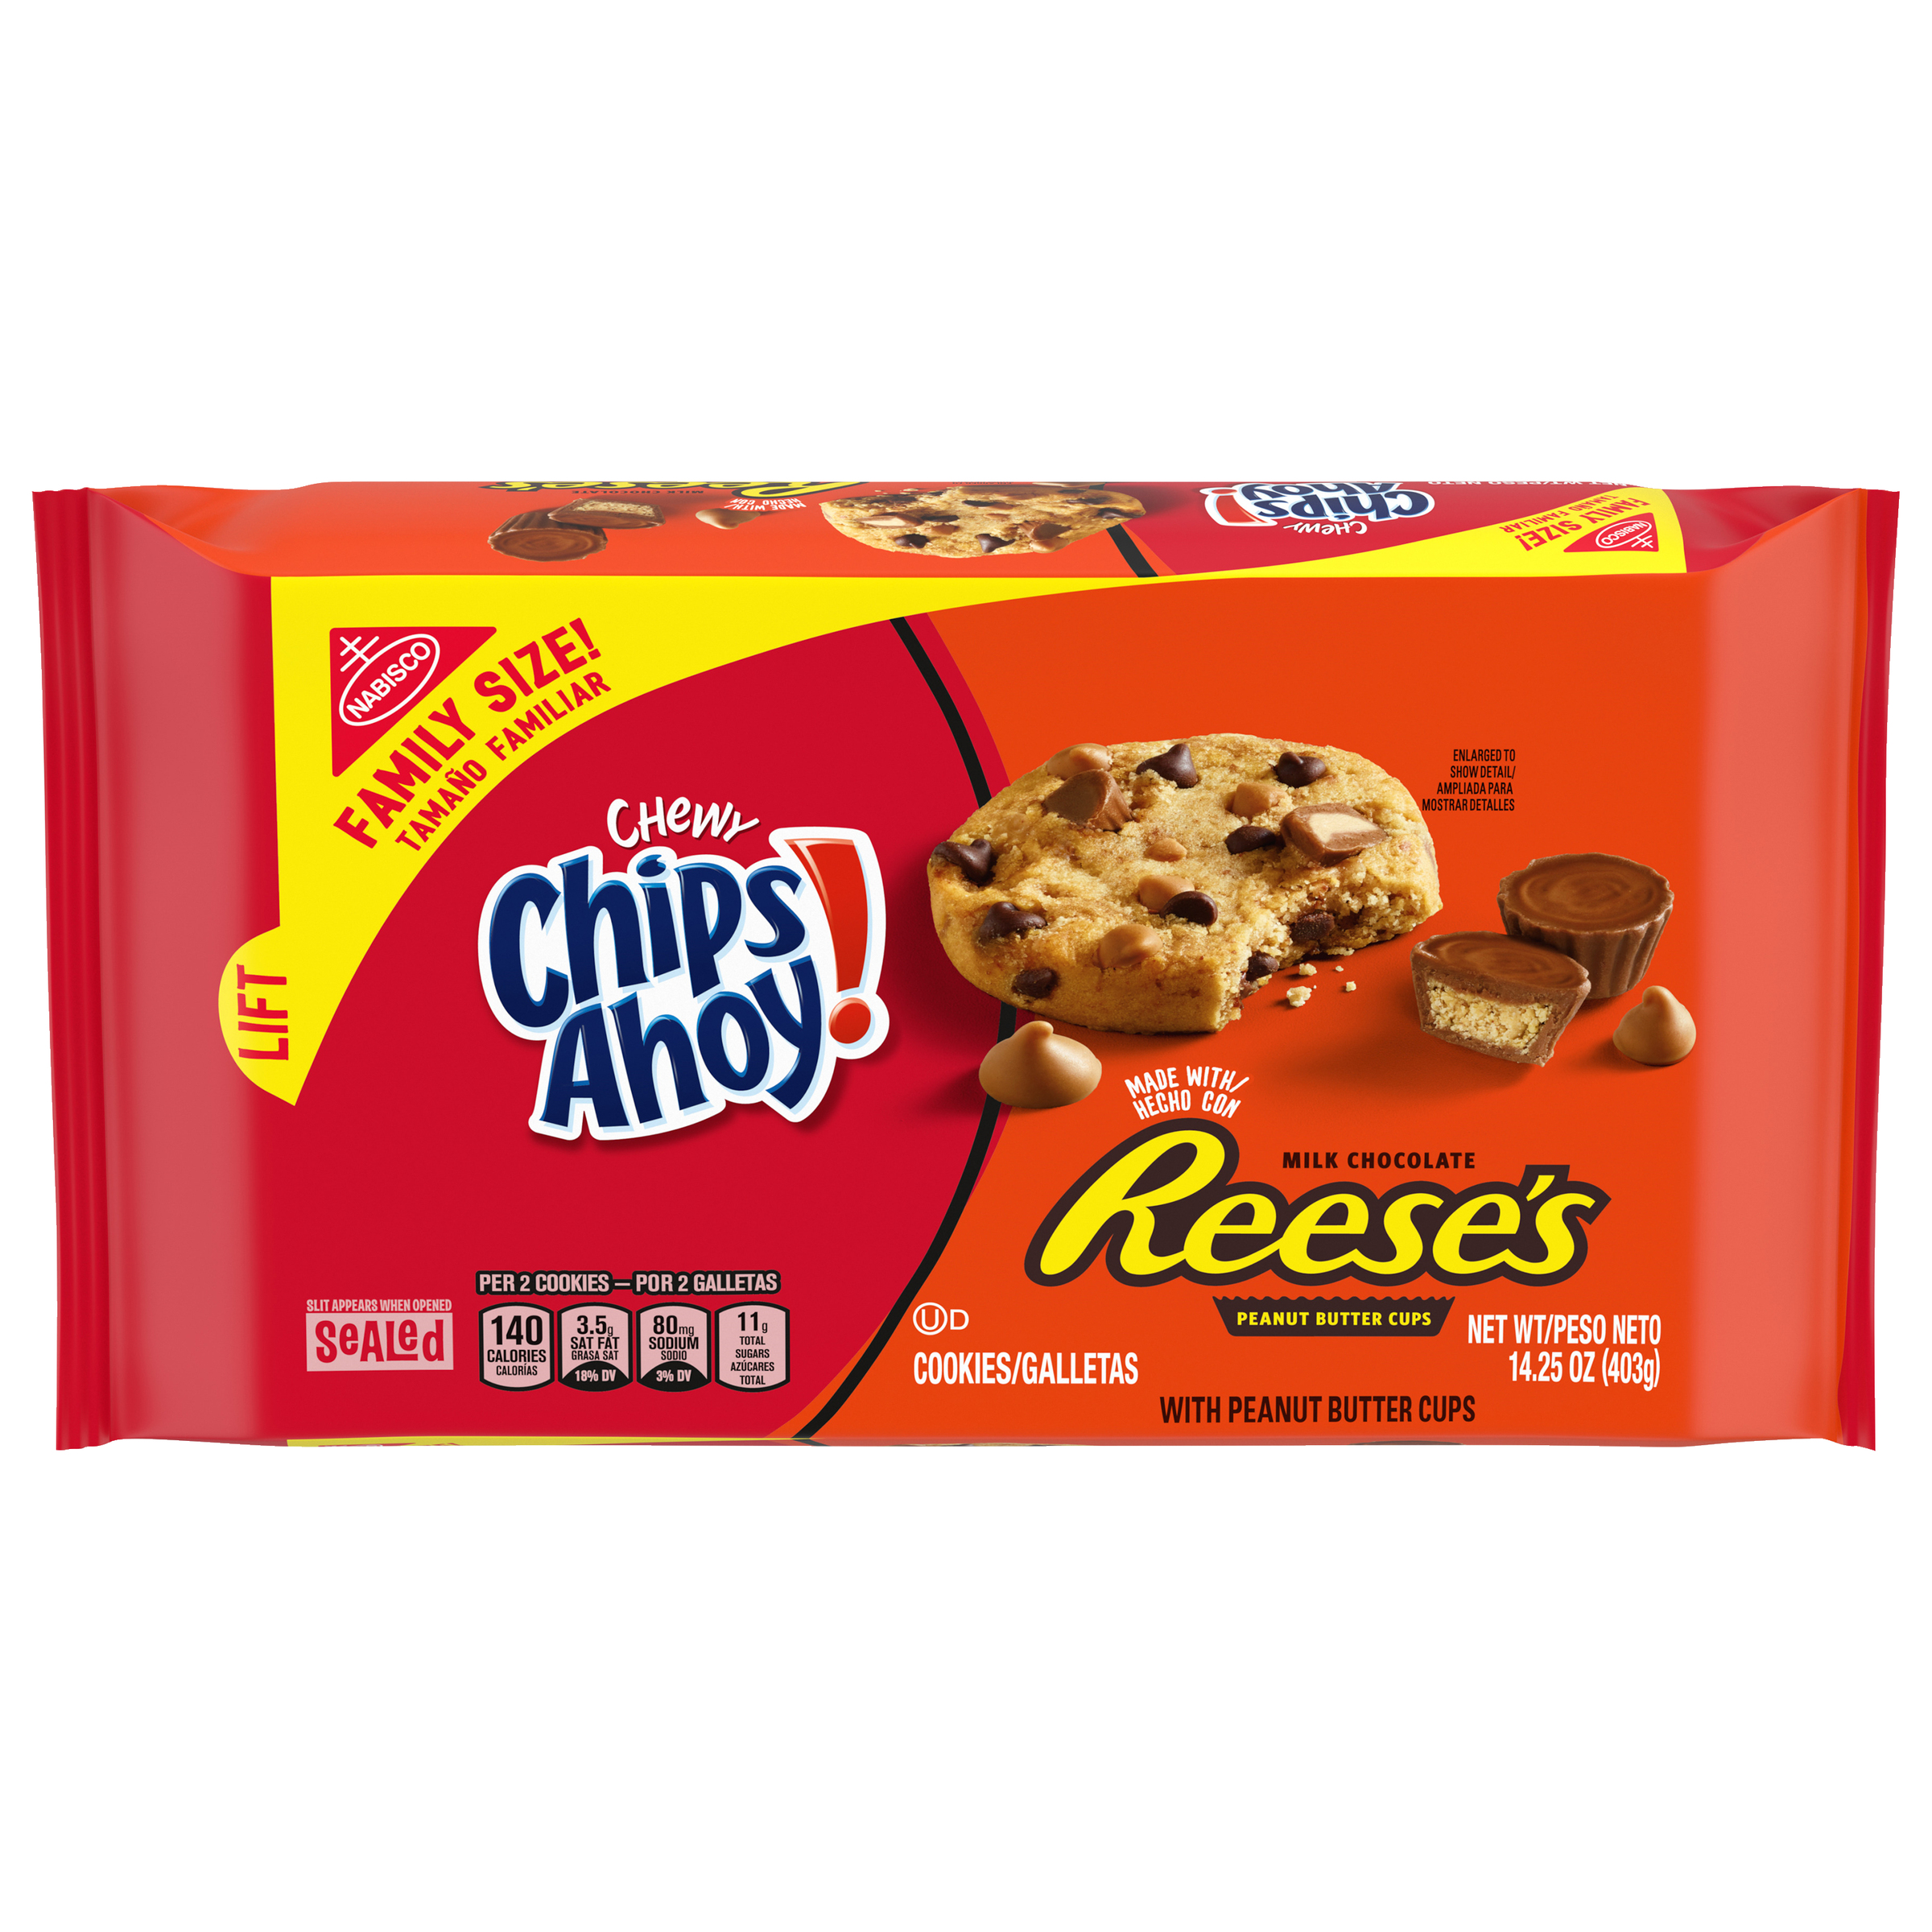 CHIPS AHOY! Chewy Chewy Cookies 14.25 oz